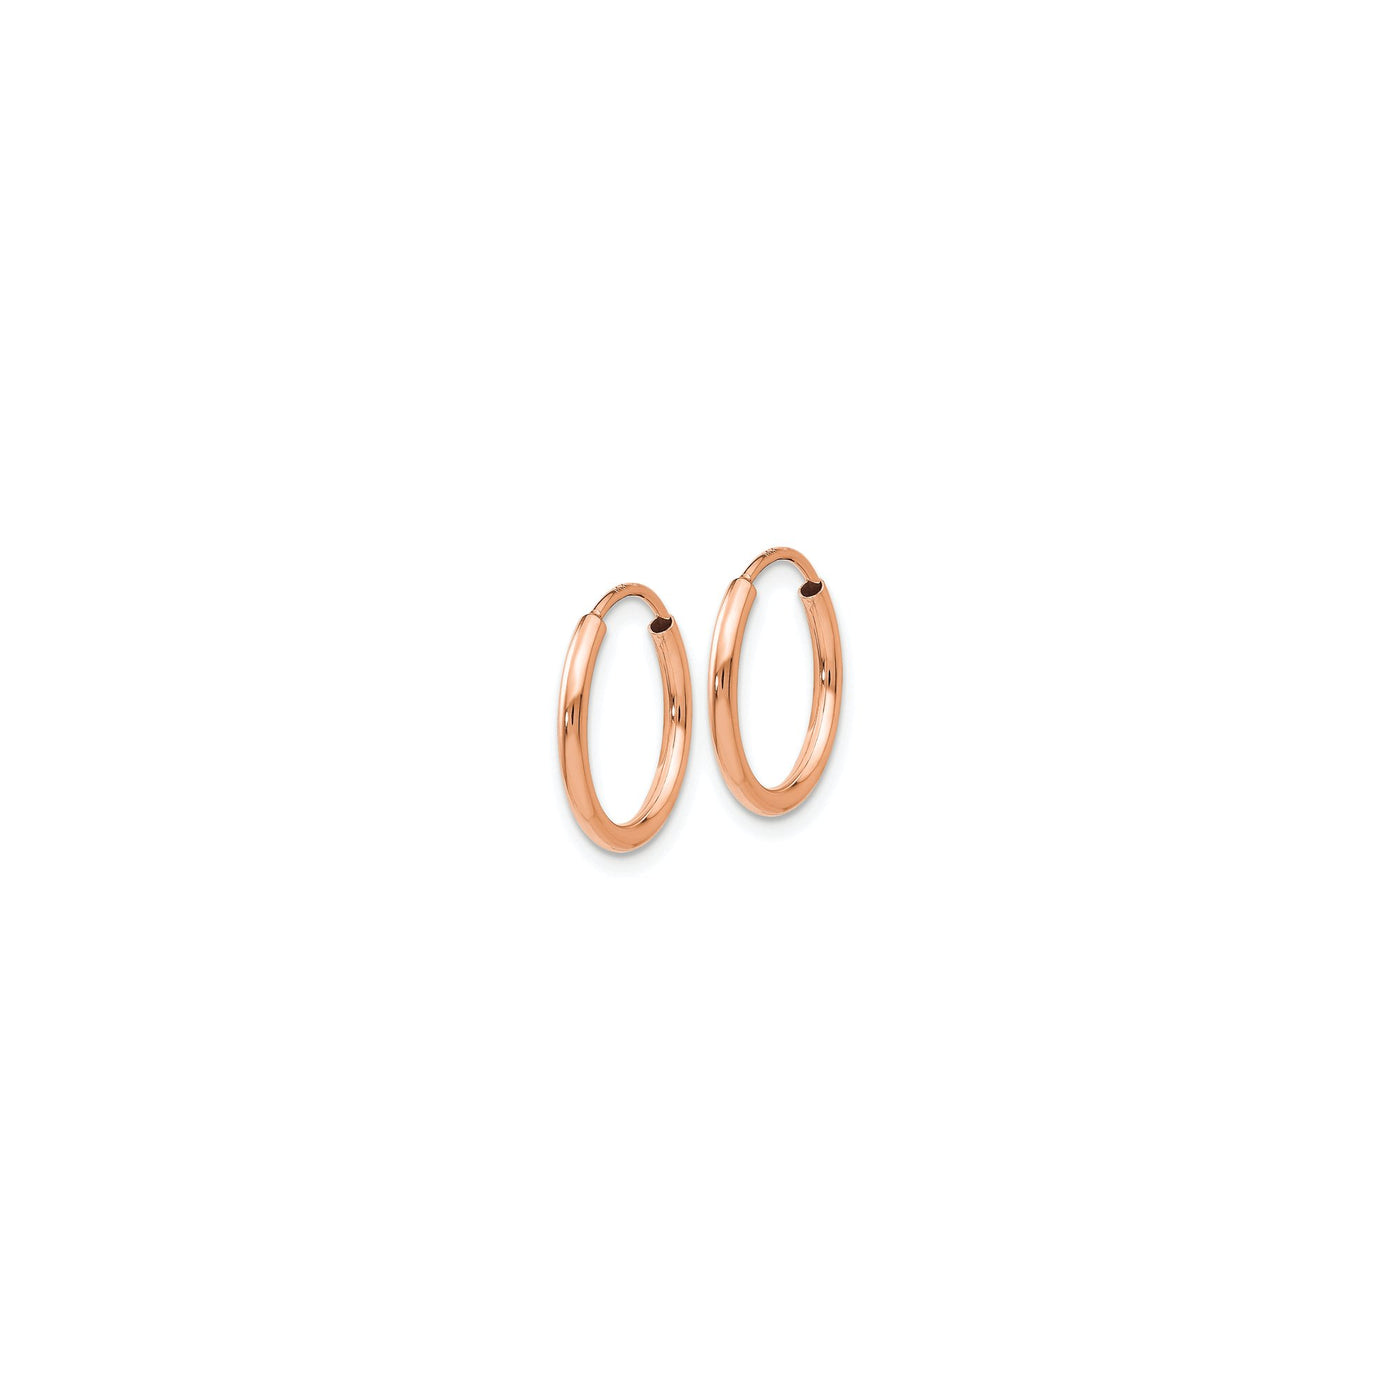 Shown in 14mm * Endless 14K Gold Hoops#size_14mm